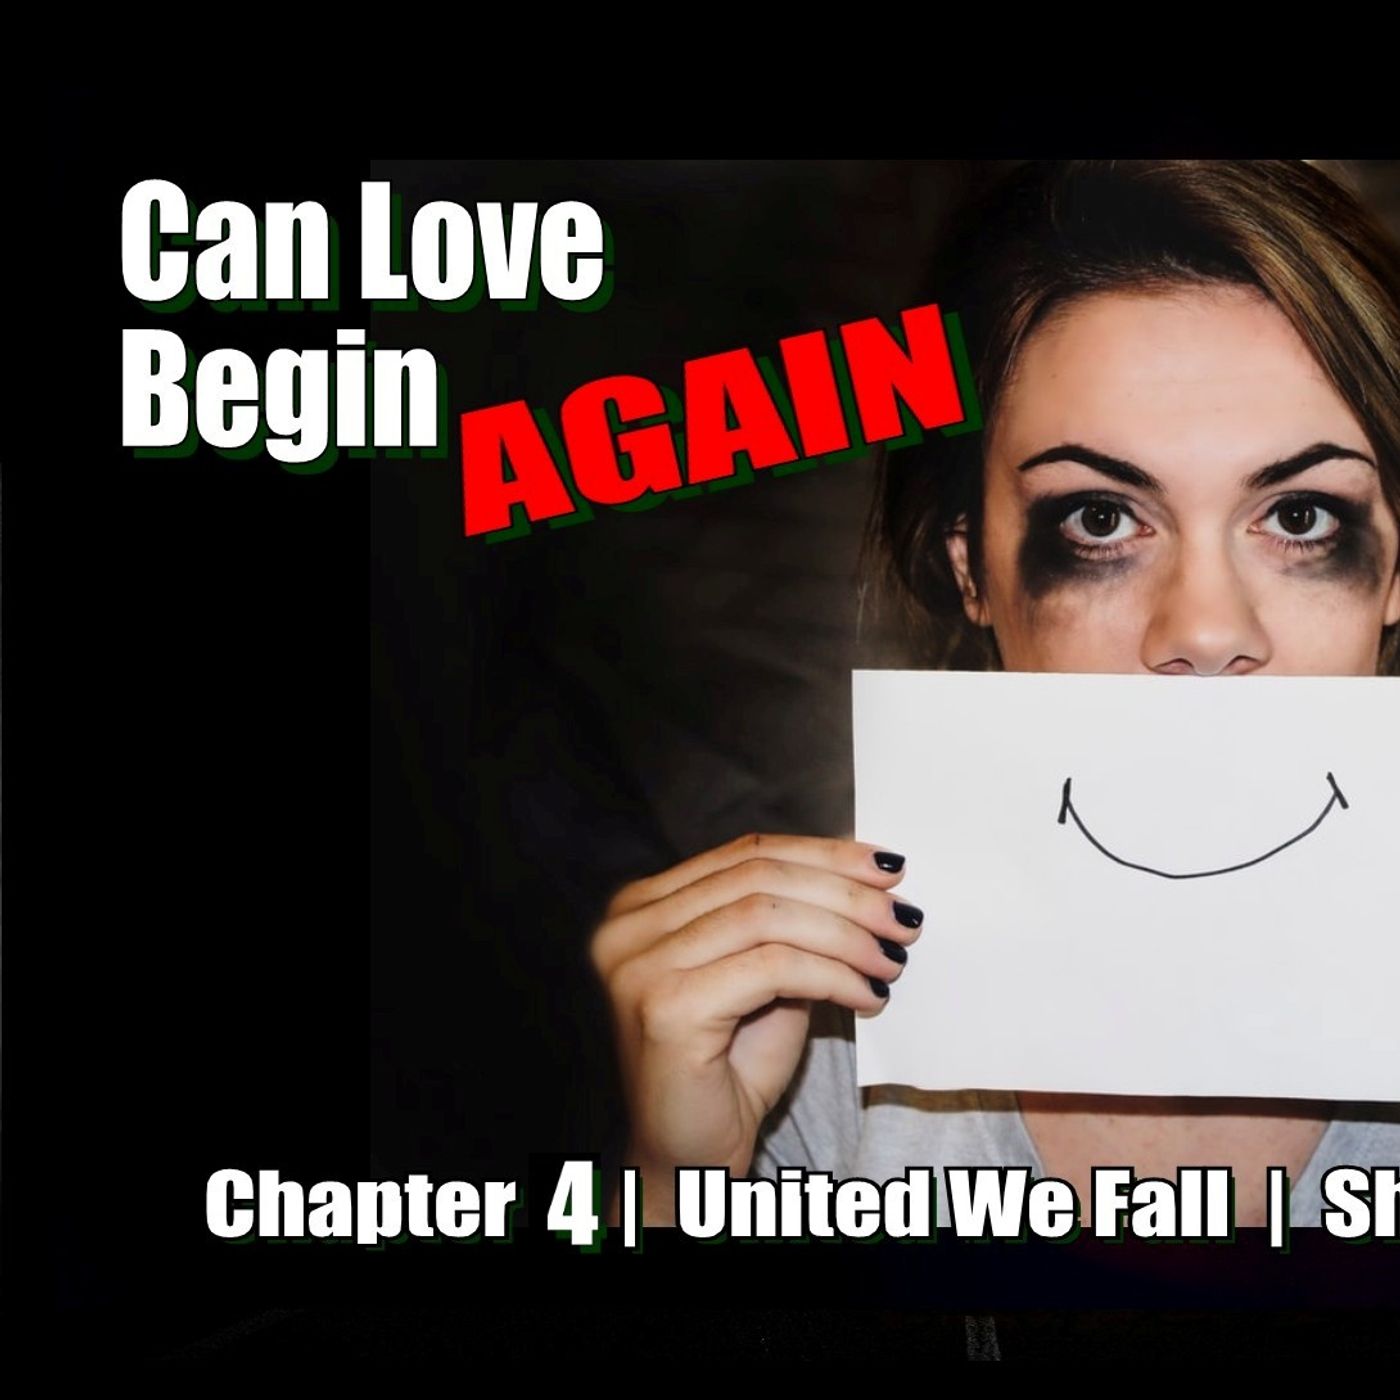 United We Fall - Chapter 4 - Can Love Begin Again